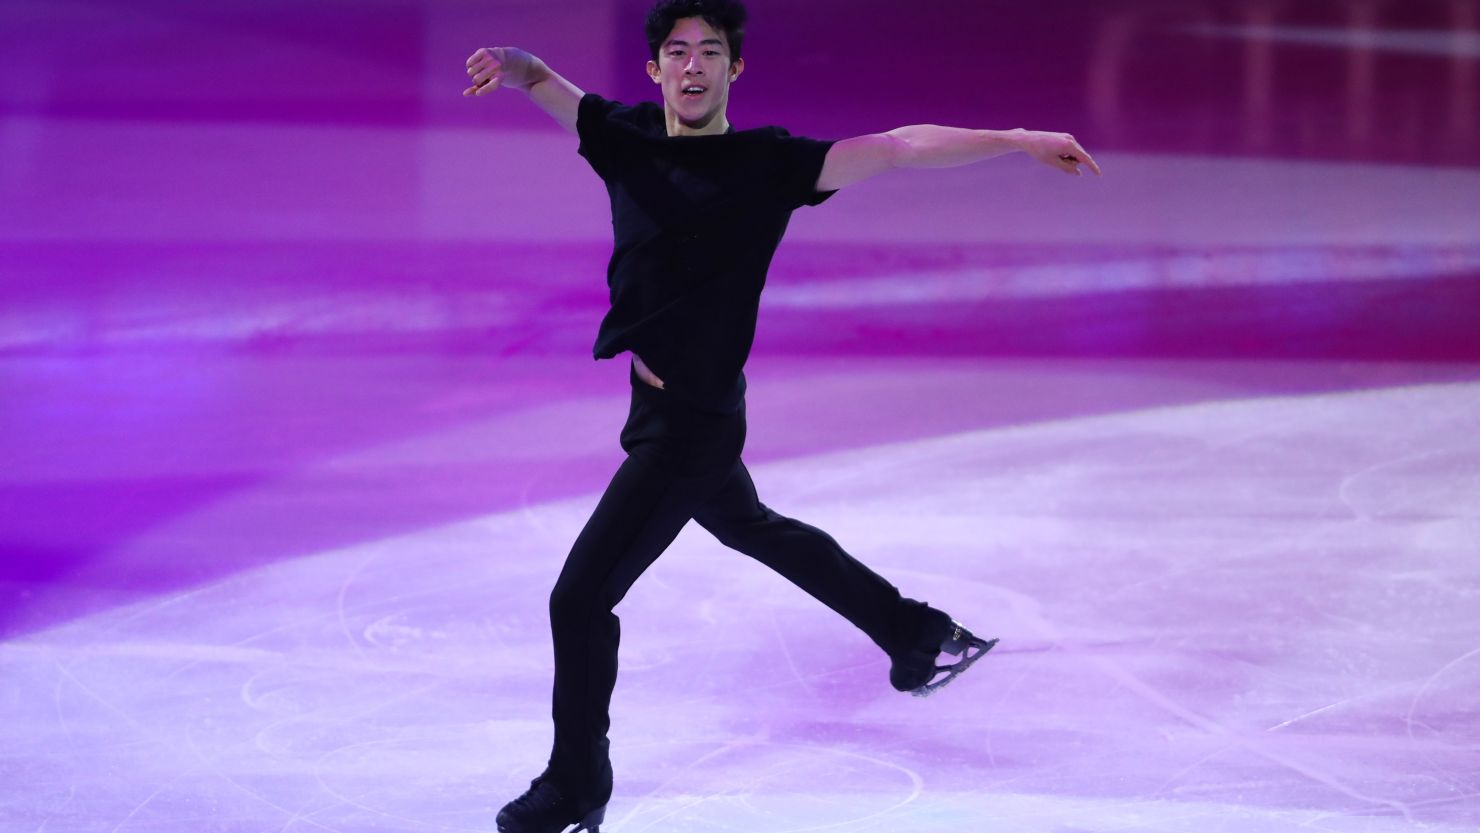 Nathan Chen performs at the ISU World Figure Skating Championships at Ericsson Globe on March 28, 2021 in Stockholm, Sweden.